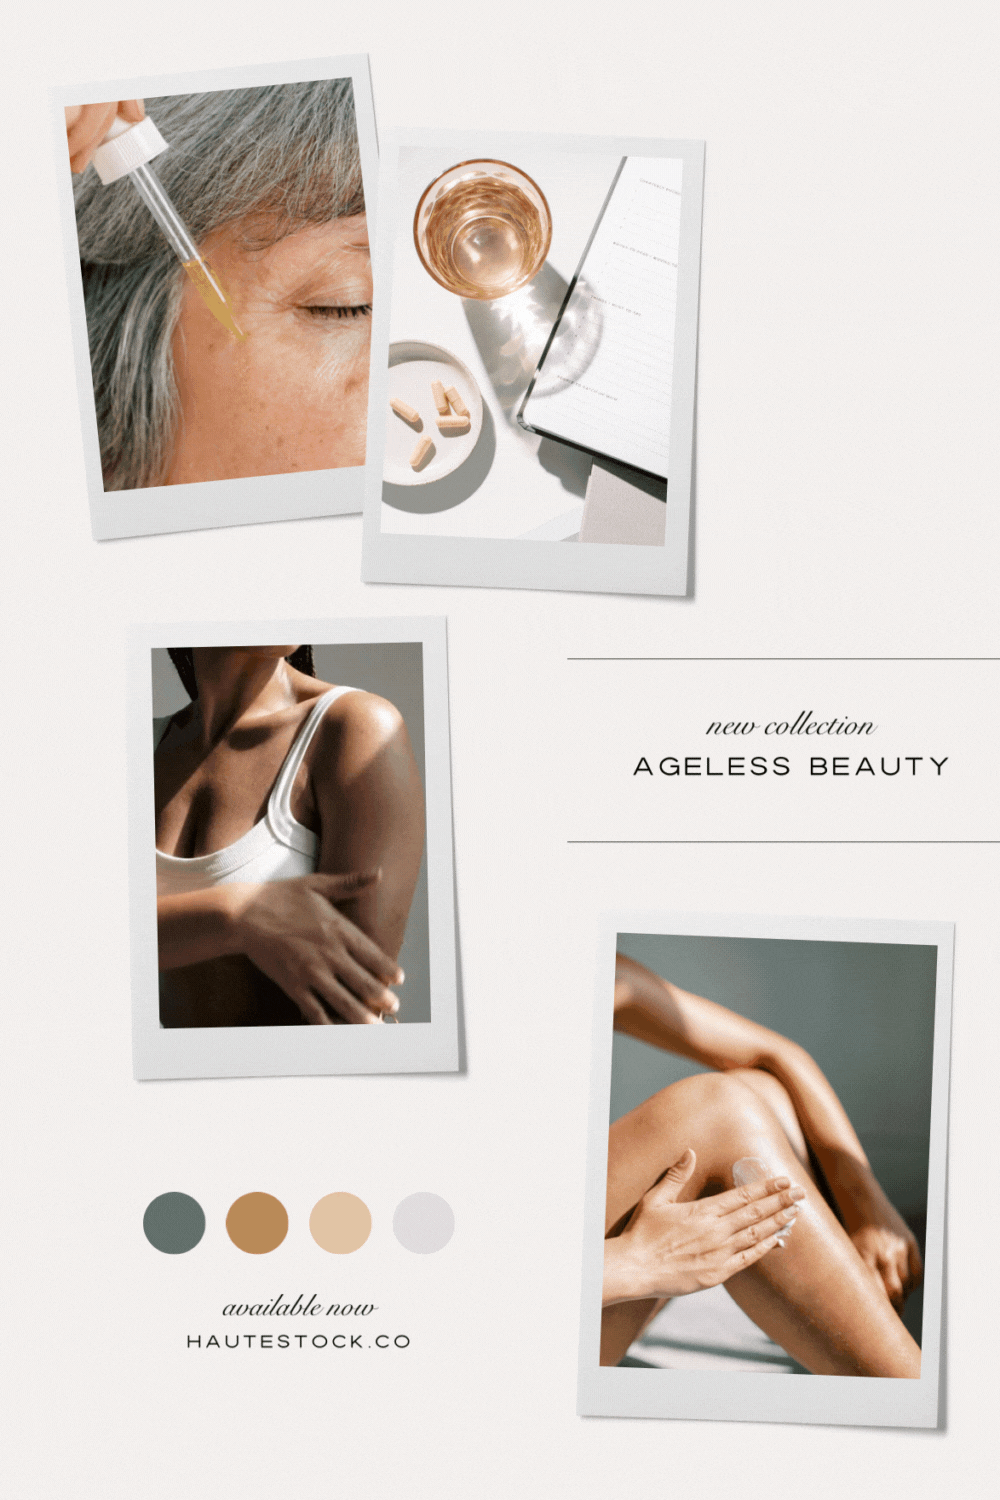 Mood board for Ageless Beauty, Haute Stock's latest collection, featuring Beauty and Wellness Stock Photos and videos that are perfect for fashion & beauty and health & wellness industries.